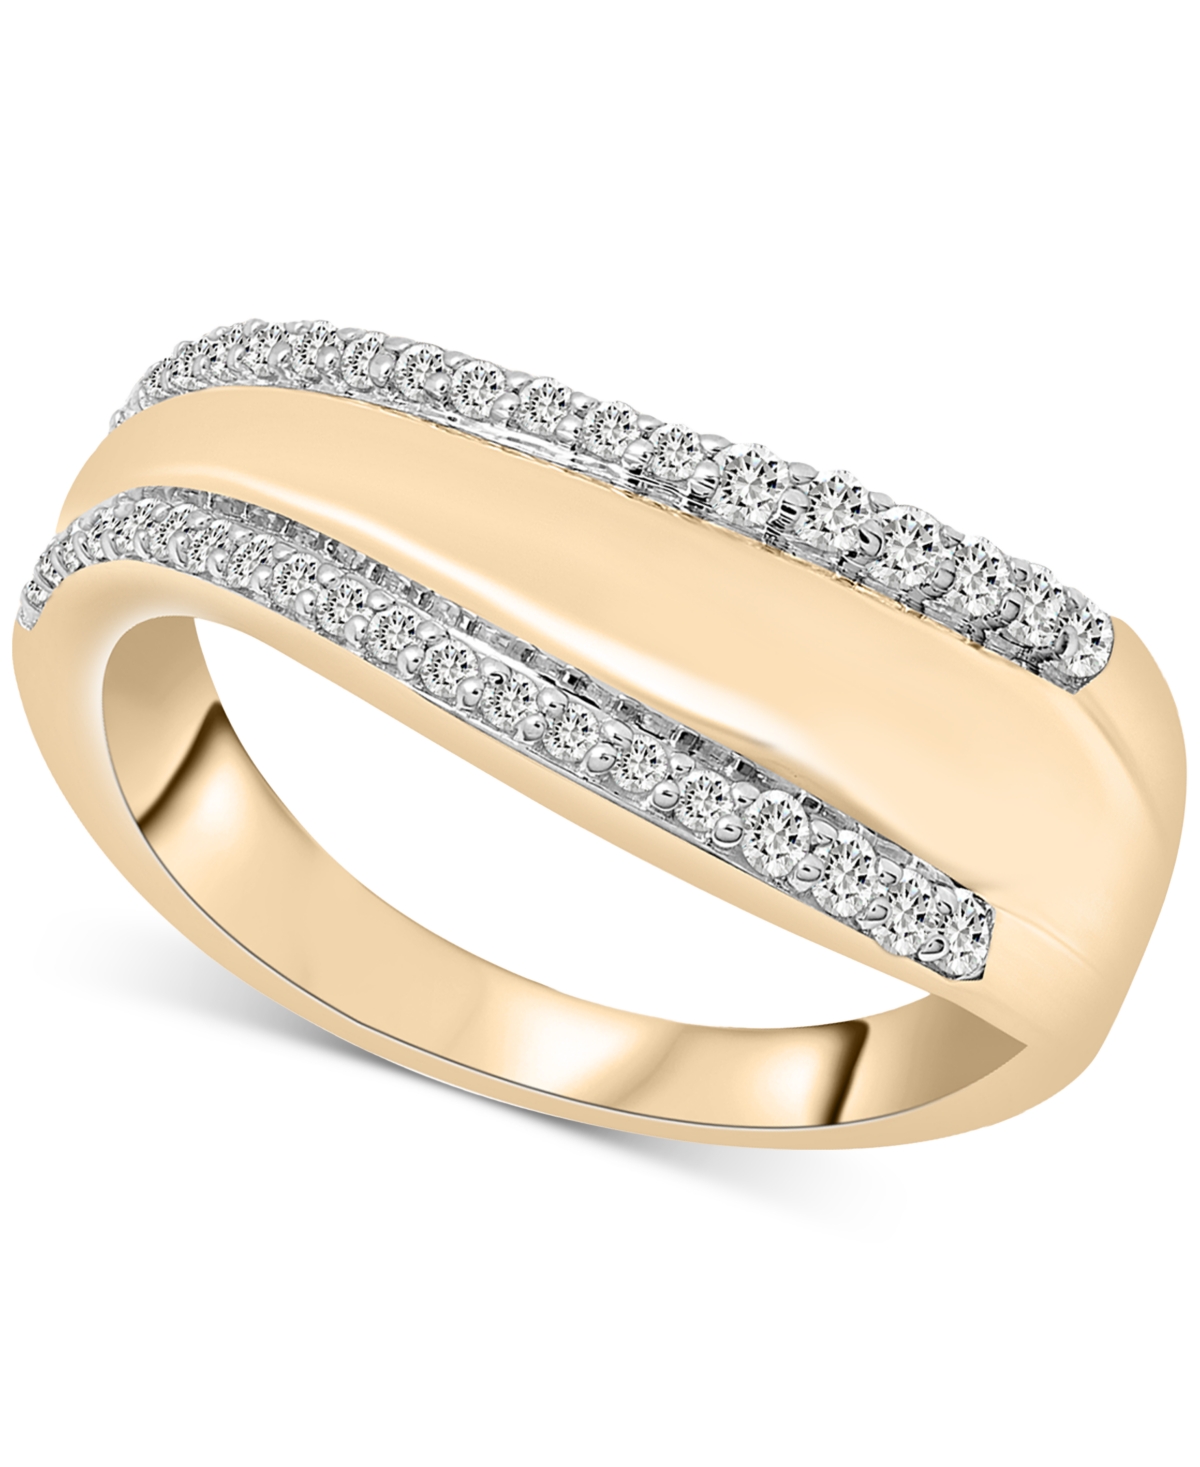 Diamond Double Row Tapered Statement Ring (1/4 ct. t.w.) in Gold Vermeil, Created for Macy's - Gold Vermeil